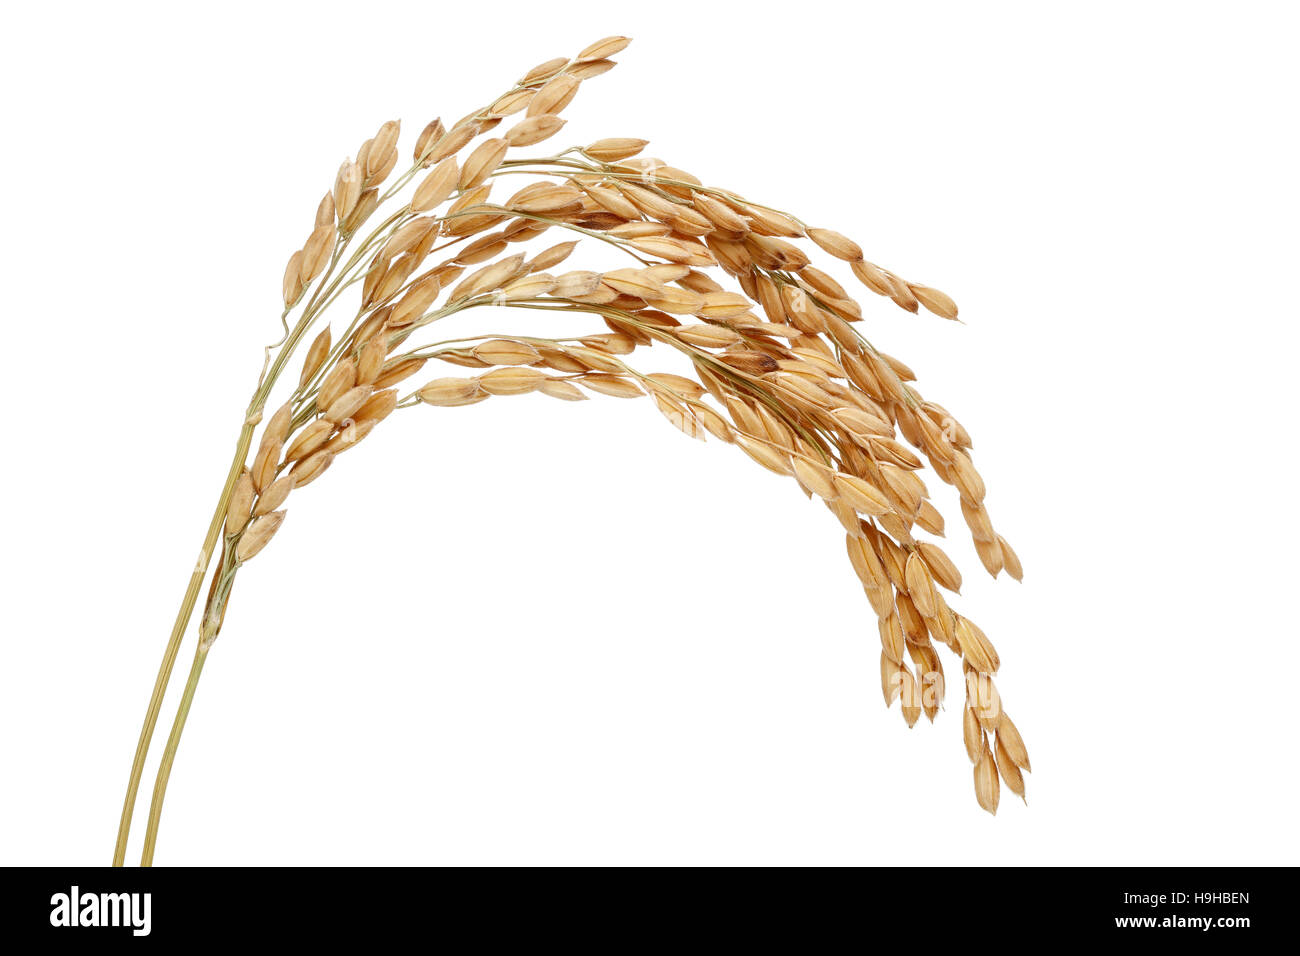 Paddy rice seed. Isolated on a white background Stock Photo